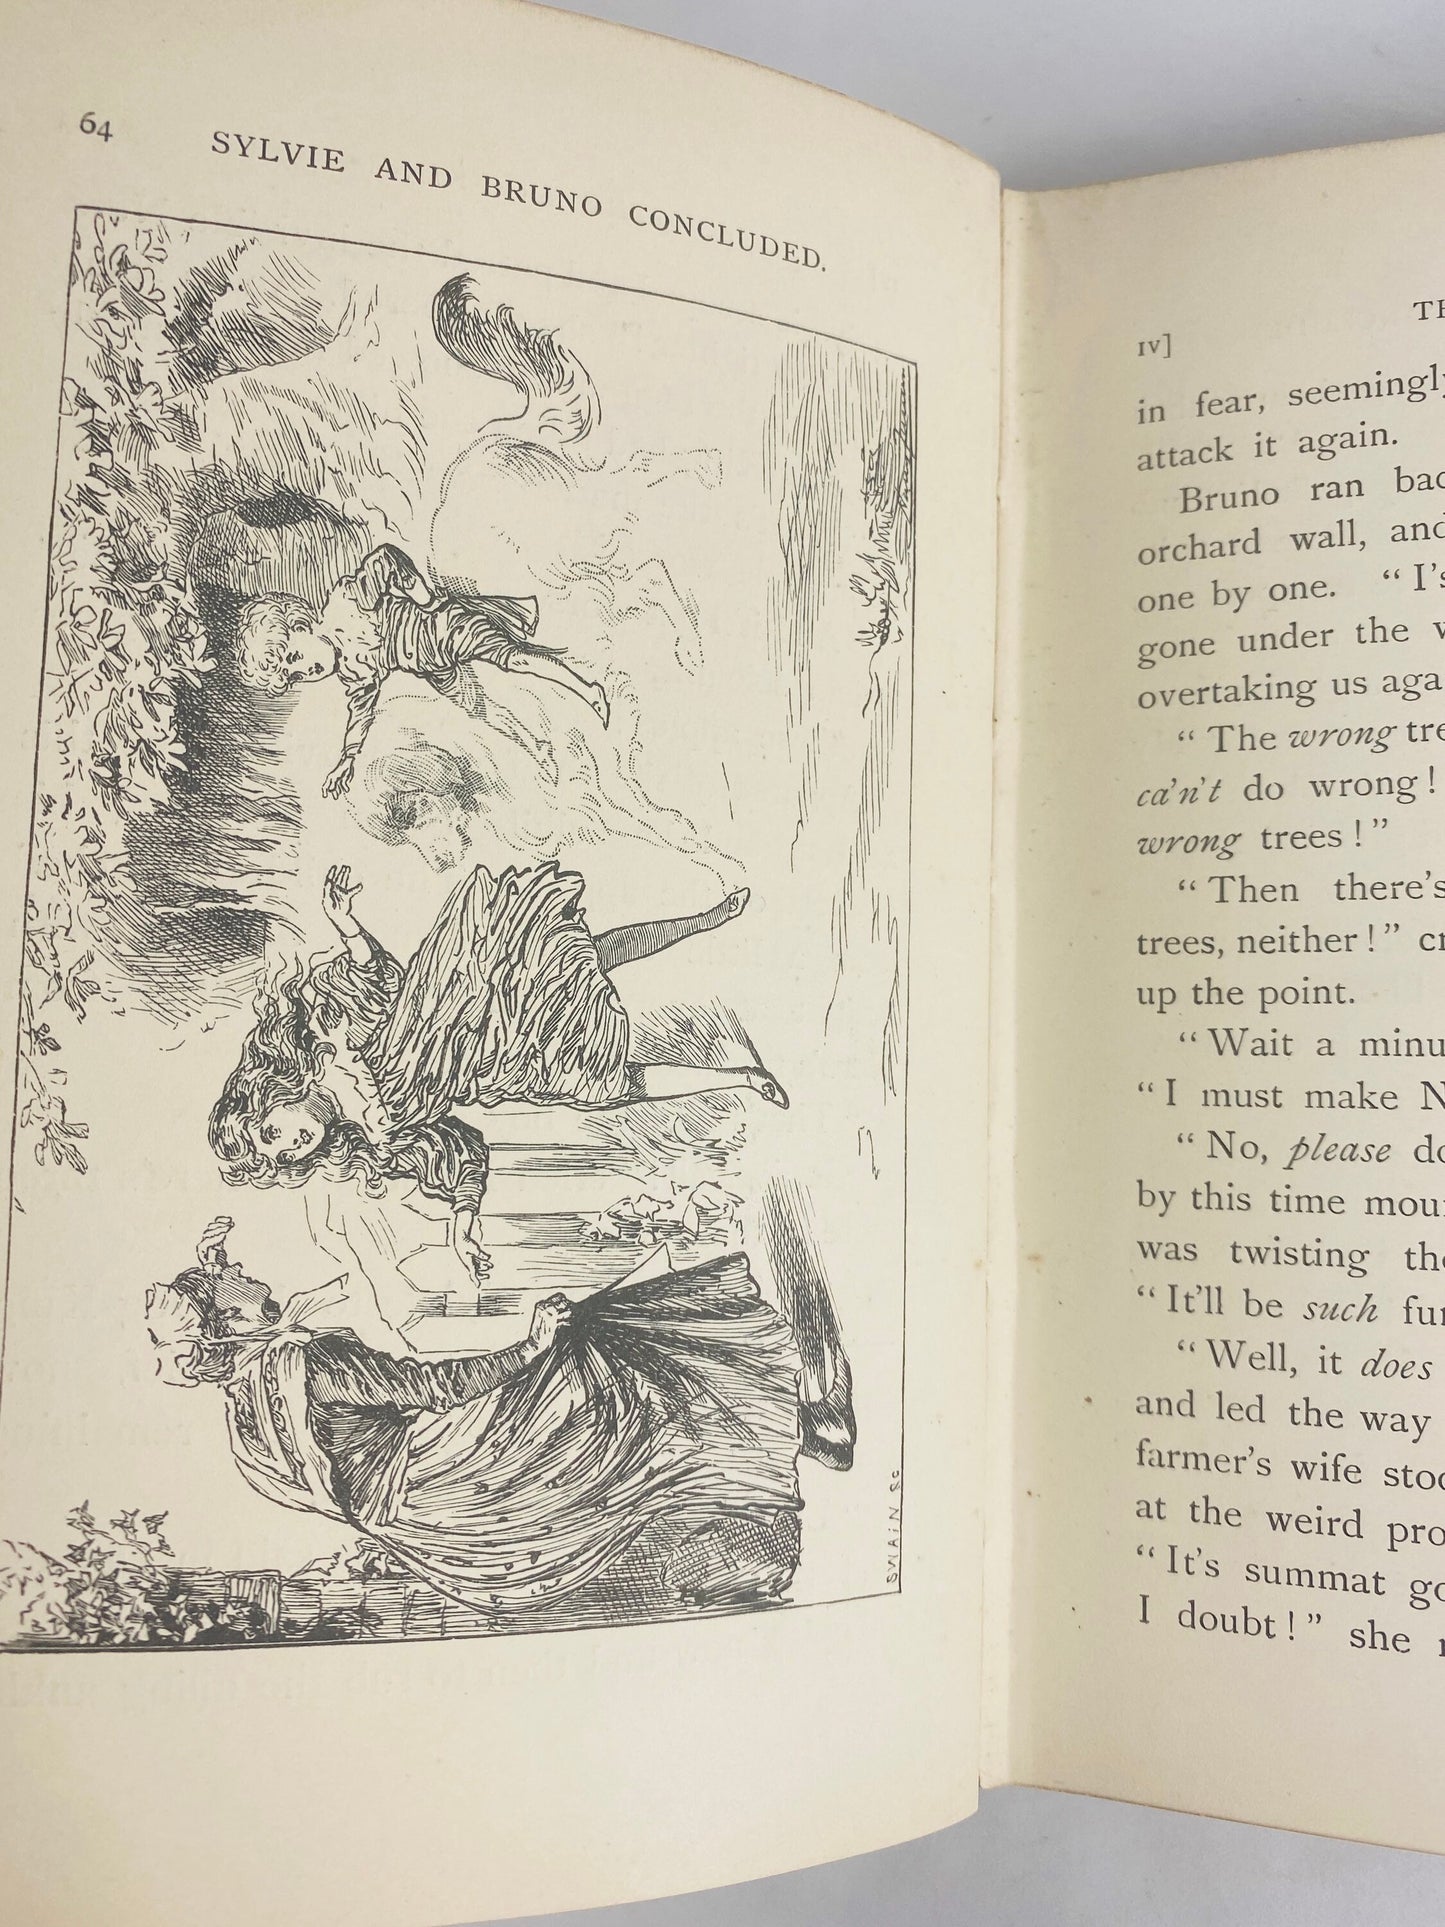 Absurdism and reality clashing with magic in Sylvie & Bruno by Lewis Carroll author of Alice’s Adventures in Wonderland Antique book 1904